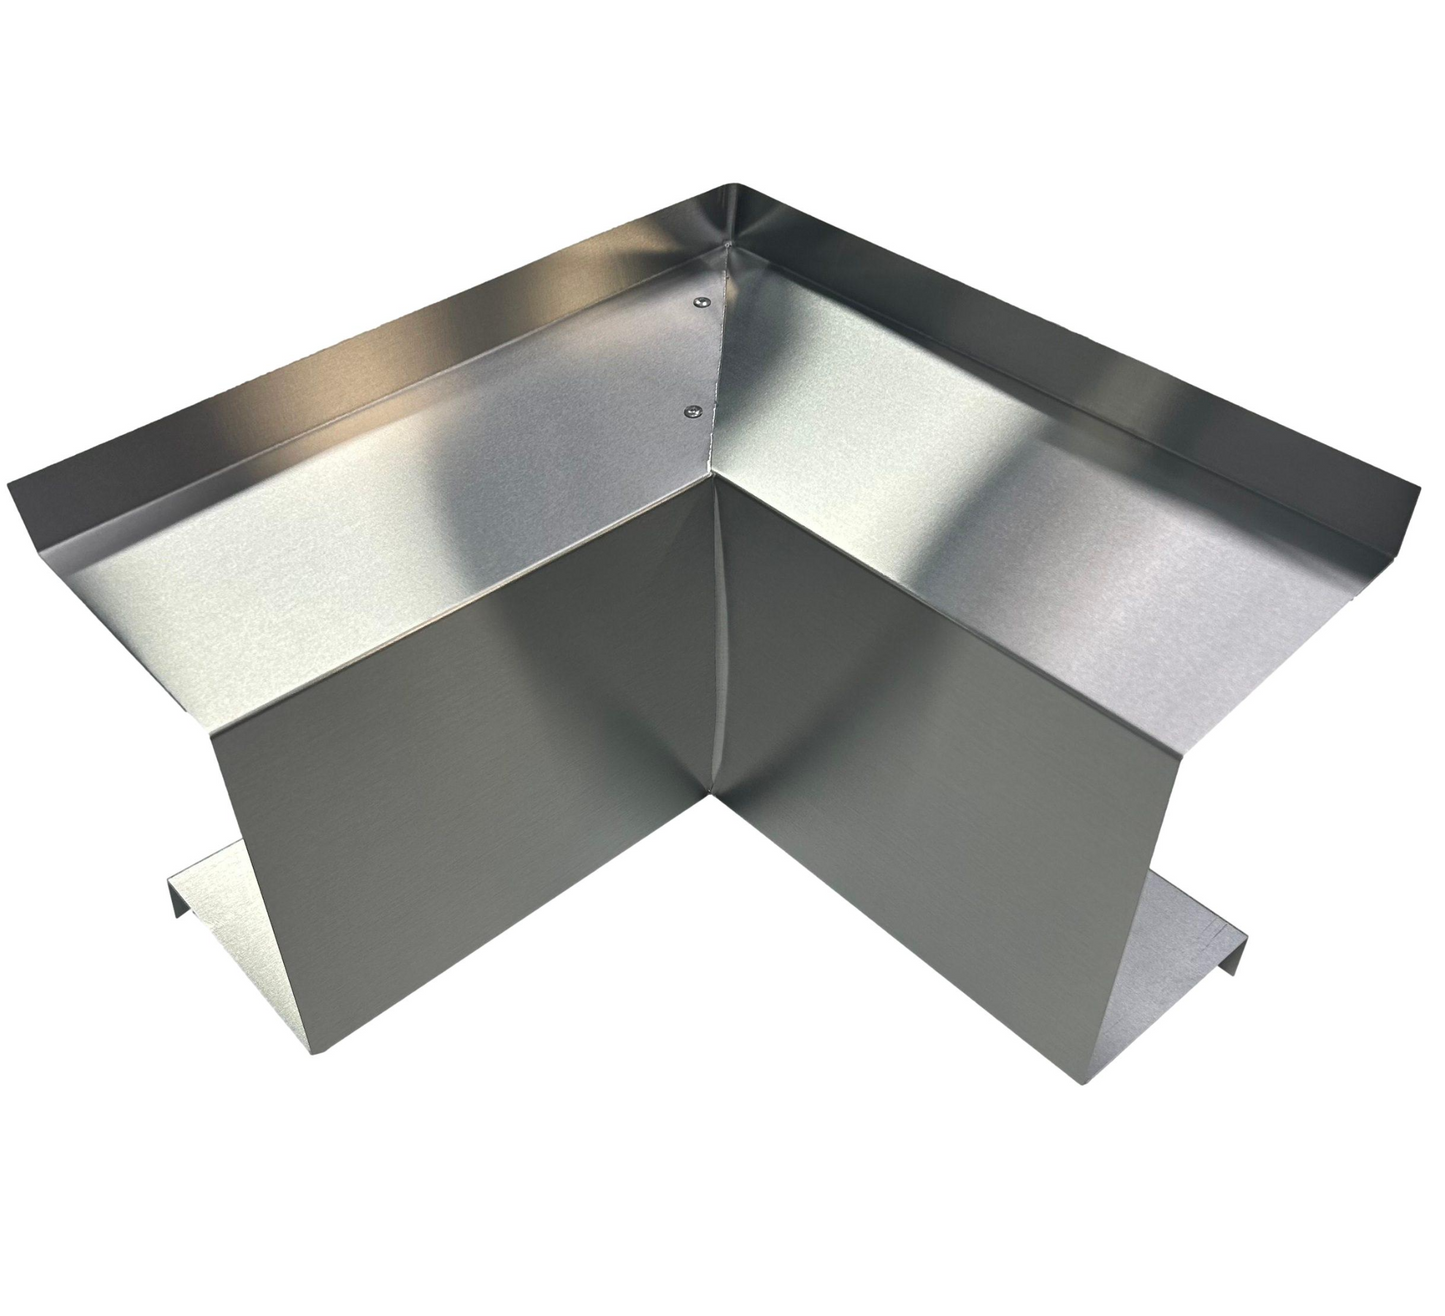 A Perma Cover Residential Series - Line Set Cover Inside Corner Elbows - Premium Quality, with a shiny, reflective surface, is designed for connecting two surfaces at a right angle. Perfect for HVAC installations, this inside corner elbow boasts a sleek, modern appearance with precise edges and a uniform finish.